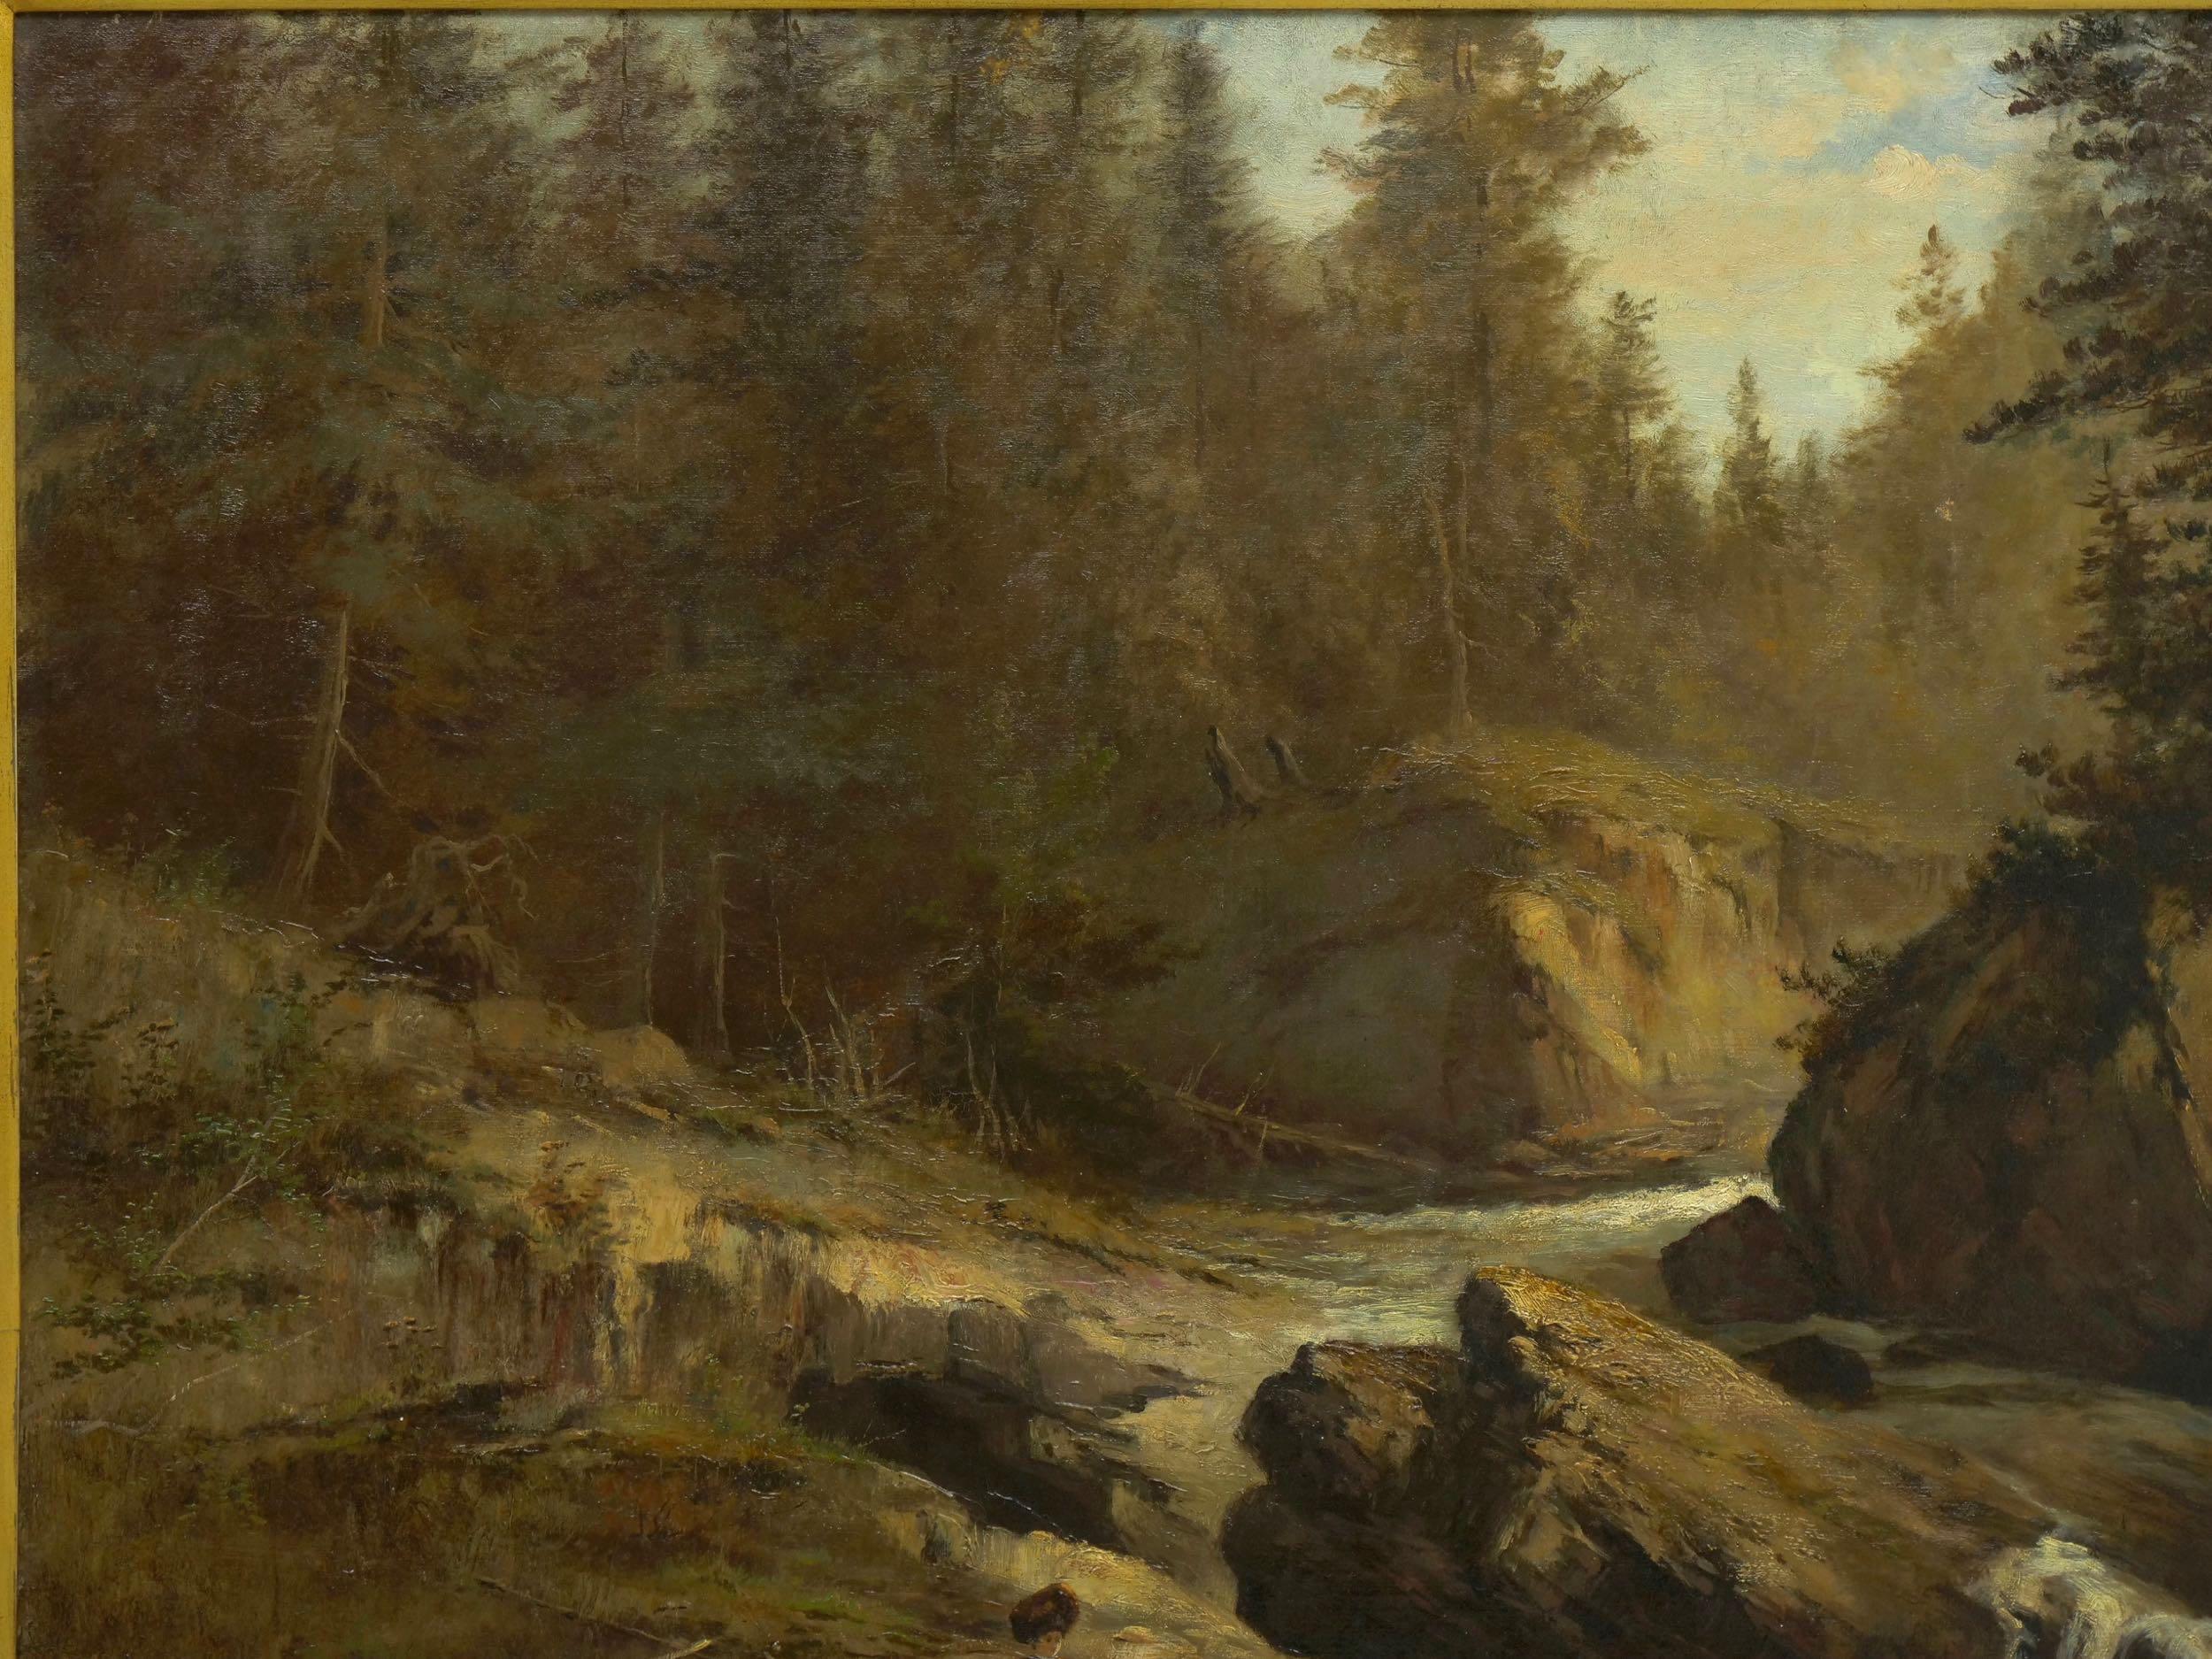 Hand-Painted “Lester River, Duluth” Antique Landscape Oil Painting by Feodor Von Luerzer